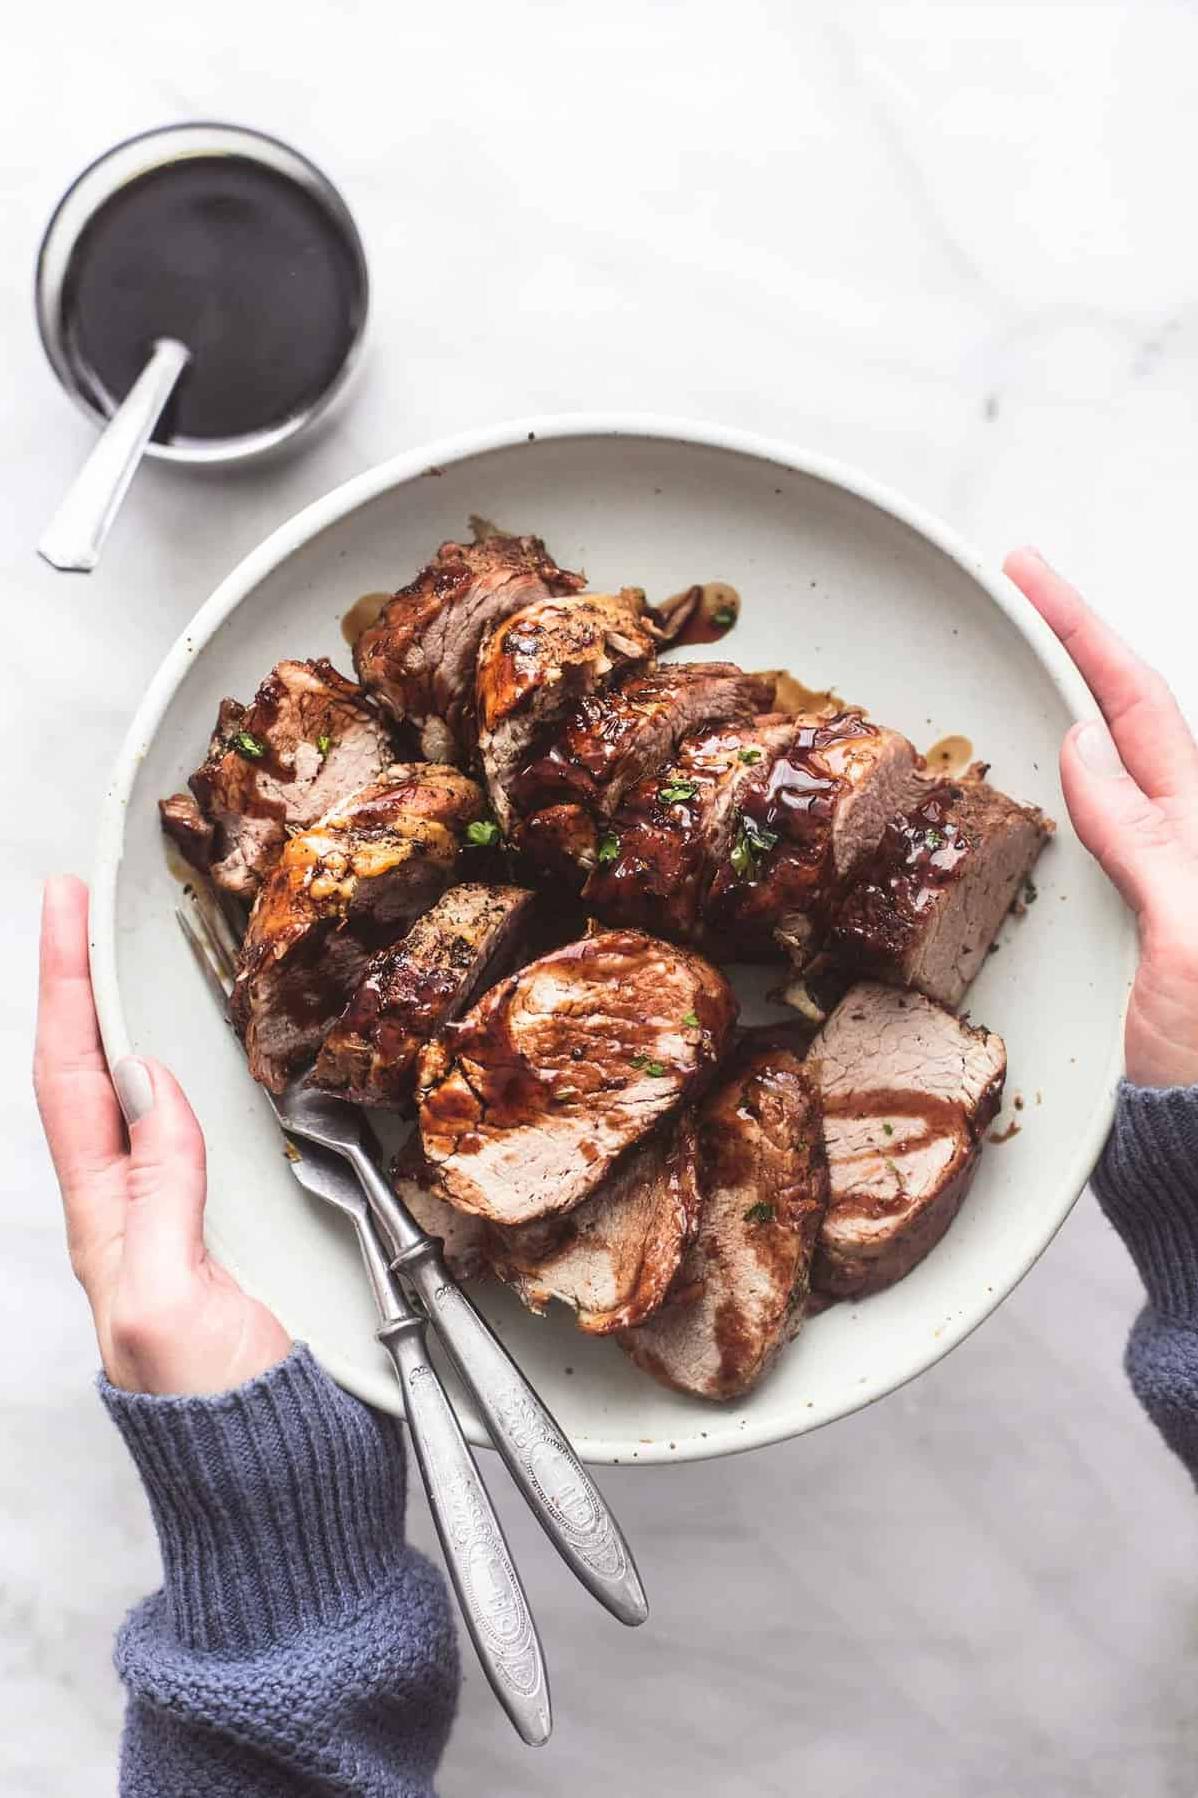  Impress your guests with this restaurant-worthy pork loin recipe.